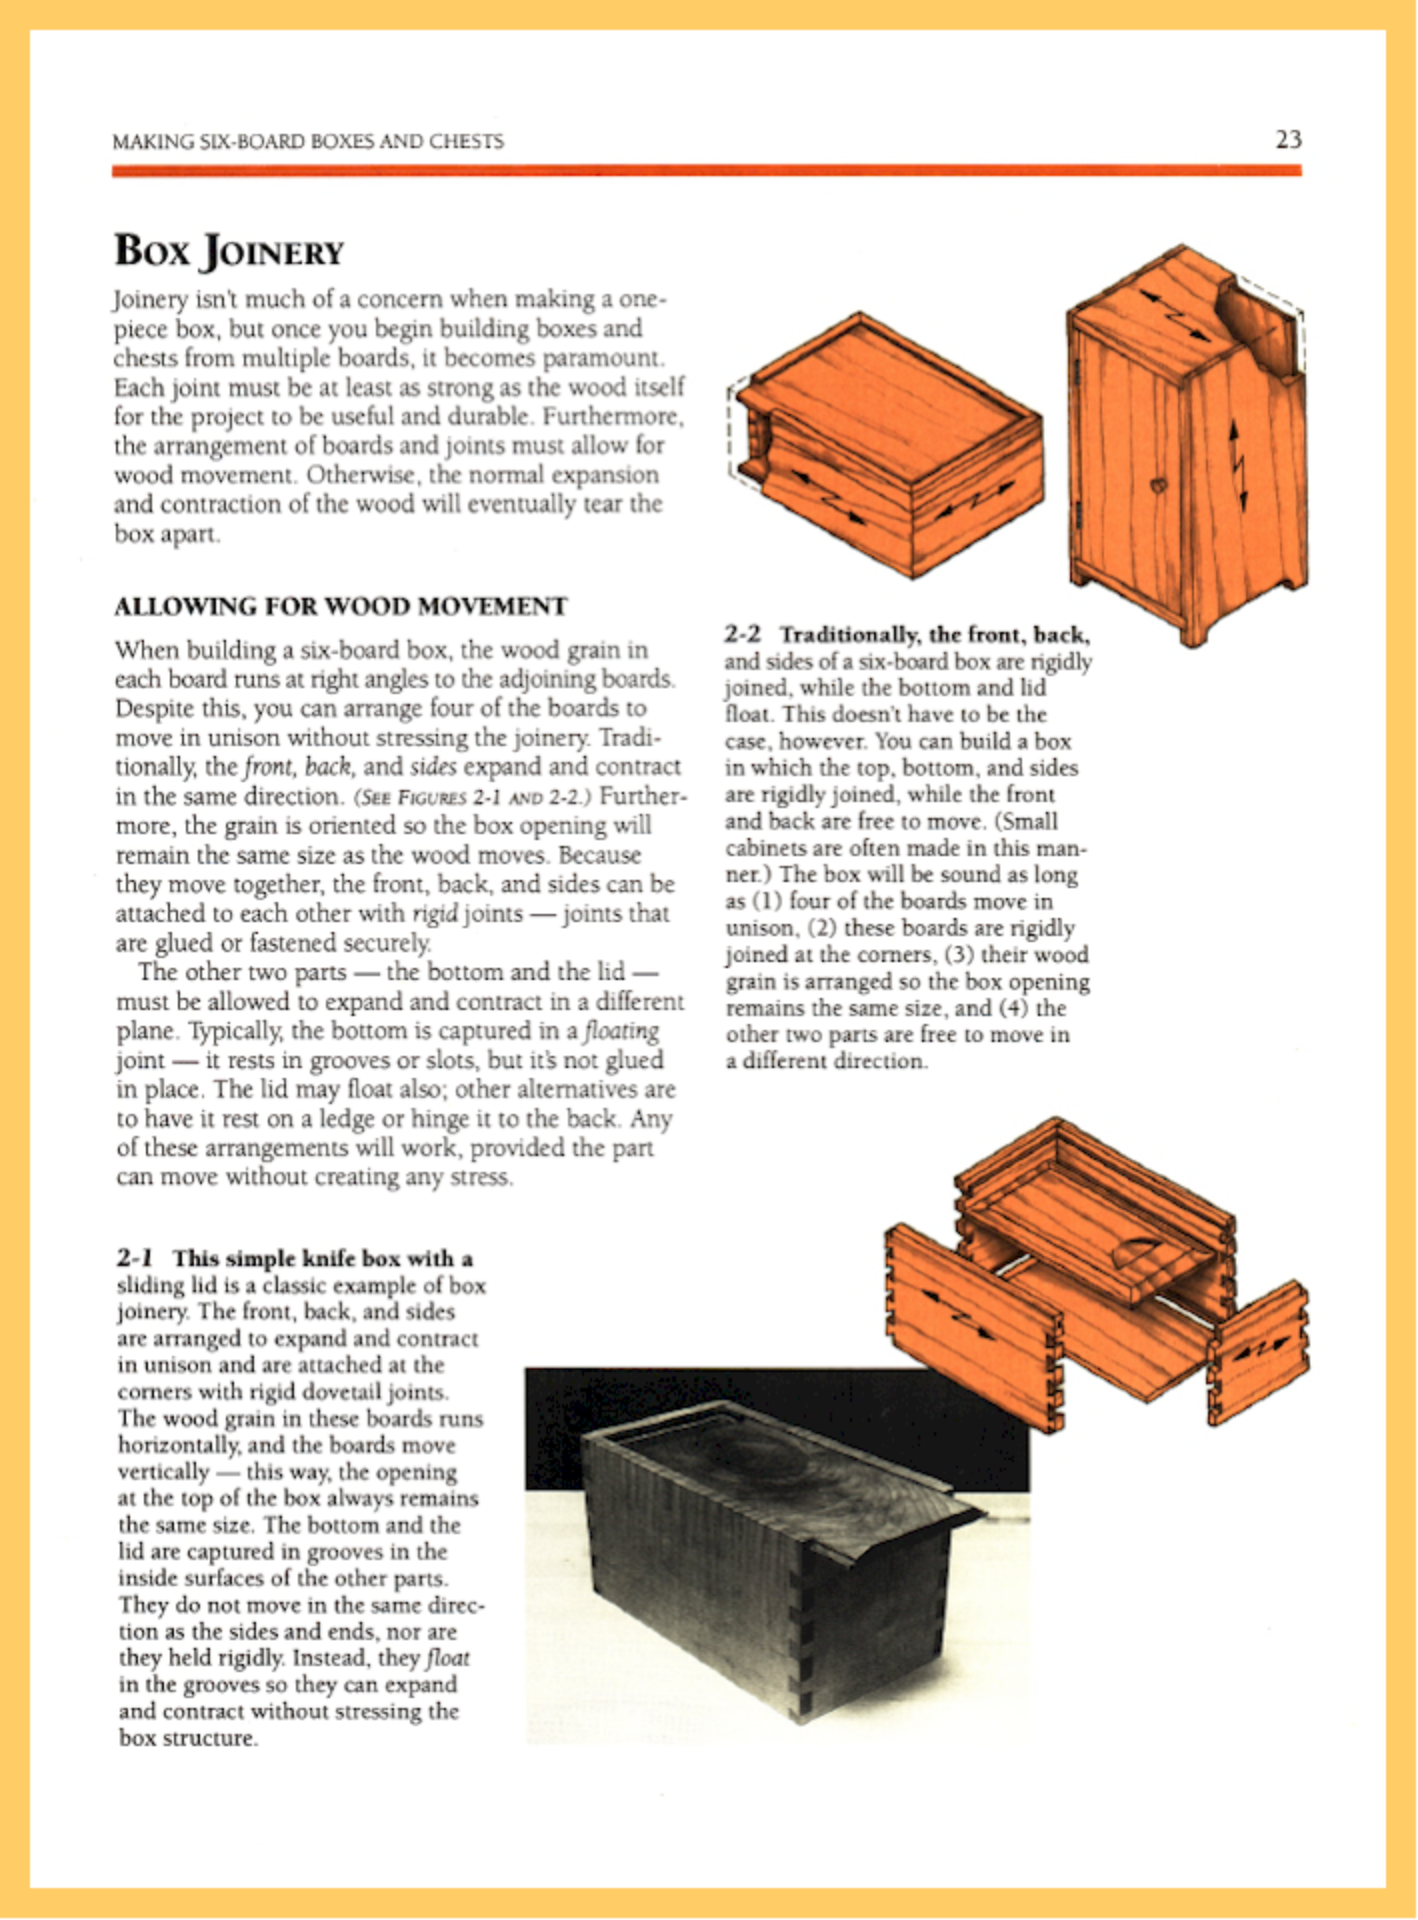 Making Boxes and Chests